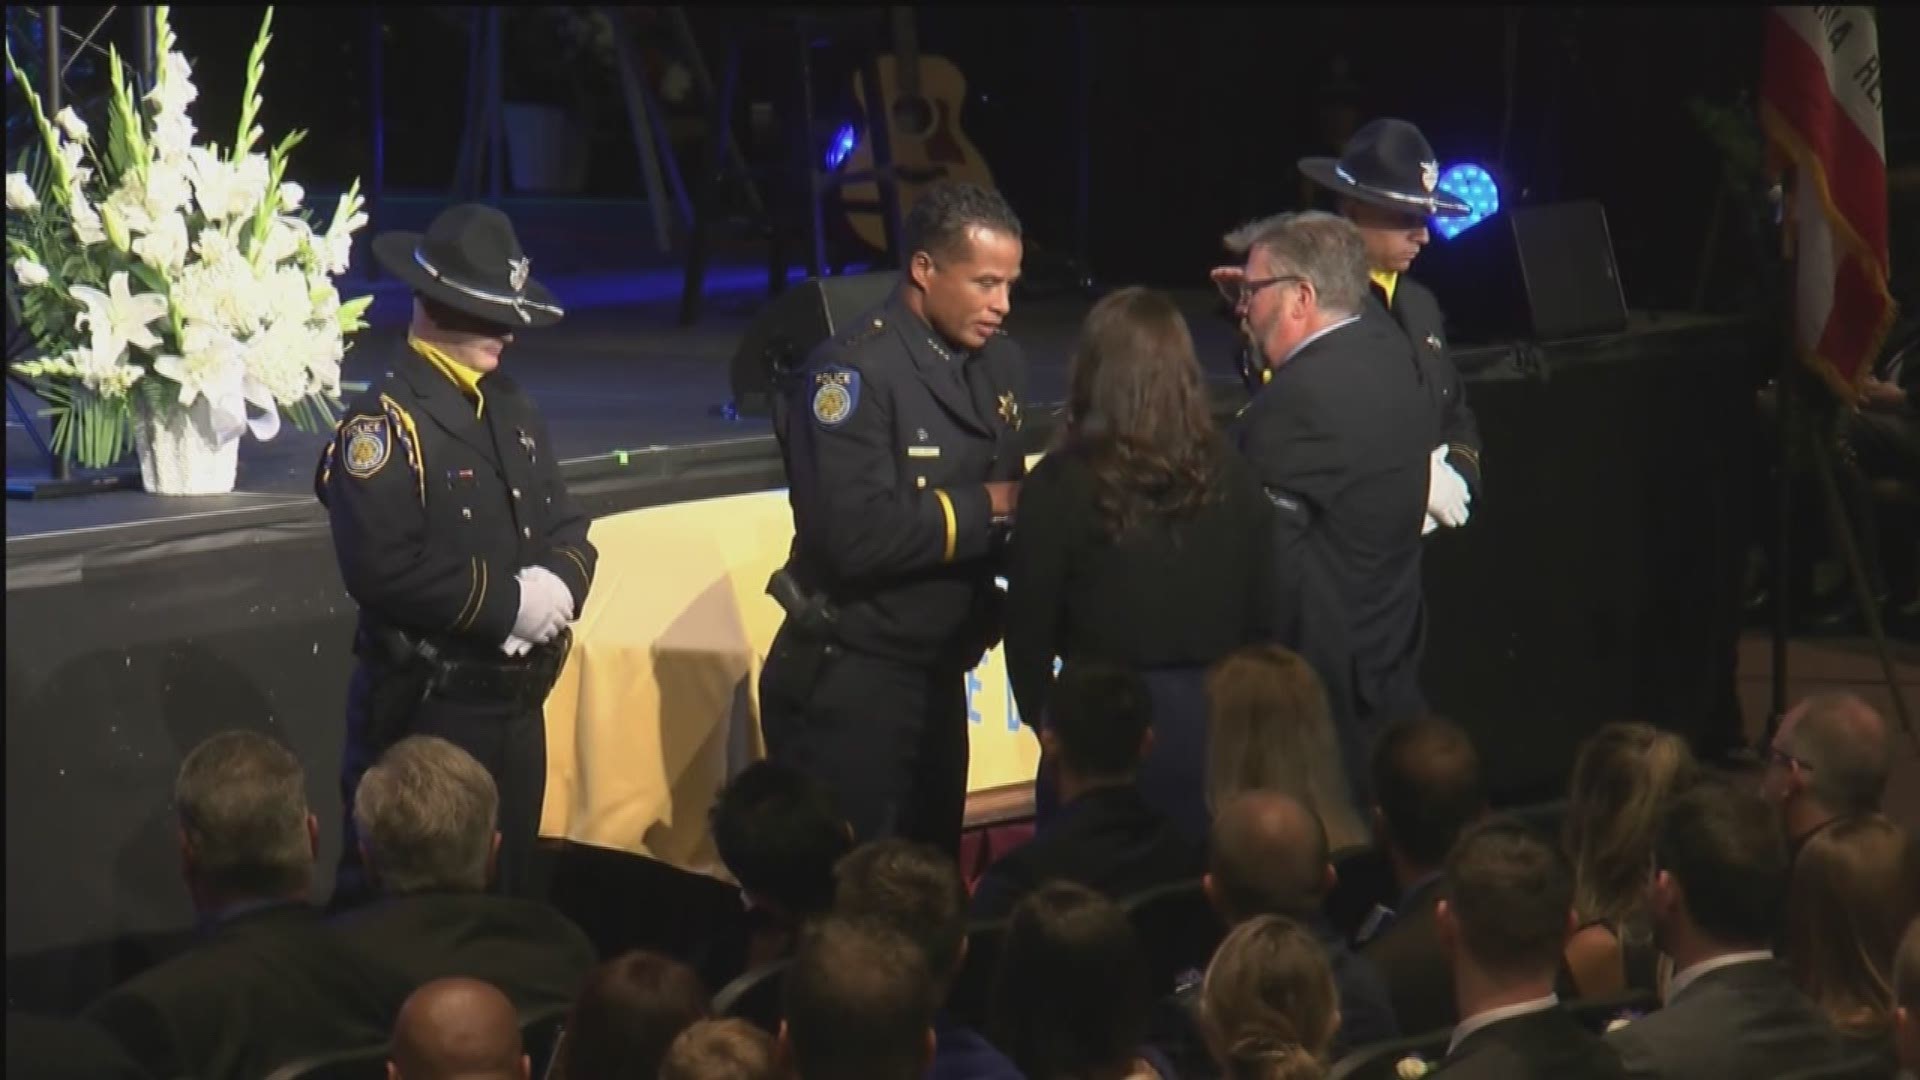 At the memorial for Sacramento Police Officer Tara O'Sullivan, her family is presented with the American flag that had been covering her casket. Sacramento Police Chief Daniel Hahn and the Sacramento Police Department Honor Guard took part in the presentation.